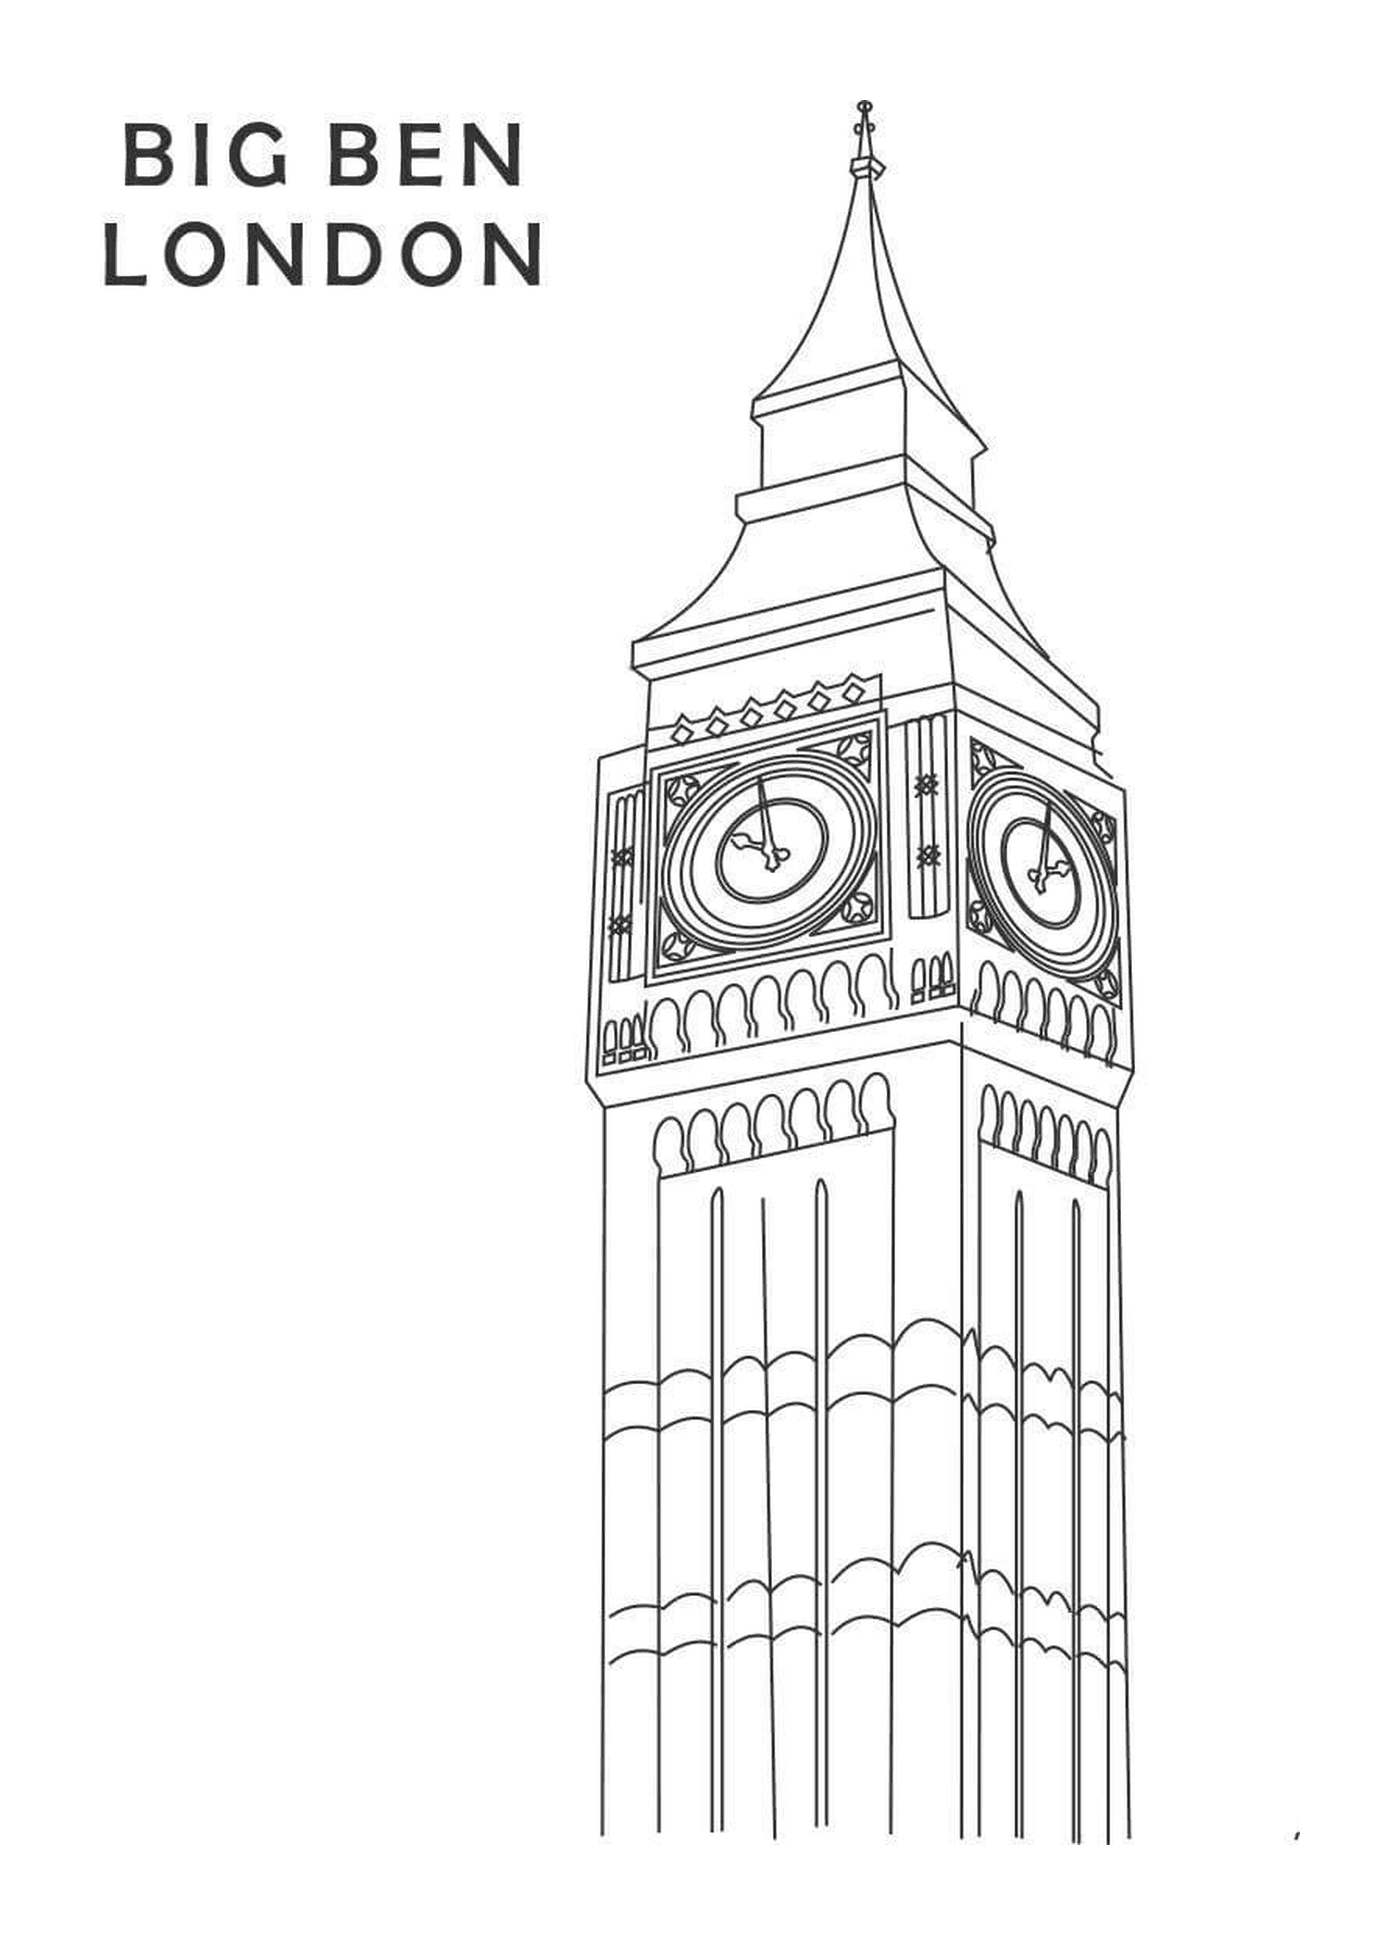  Big Ben LondonCity name (optional, probably does not need a translation) 